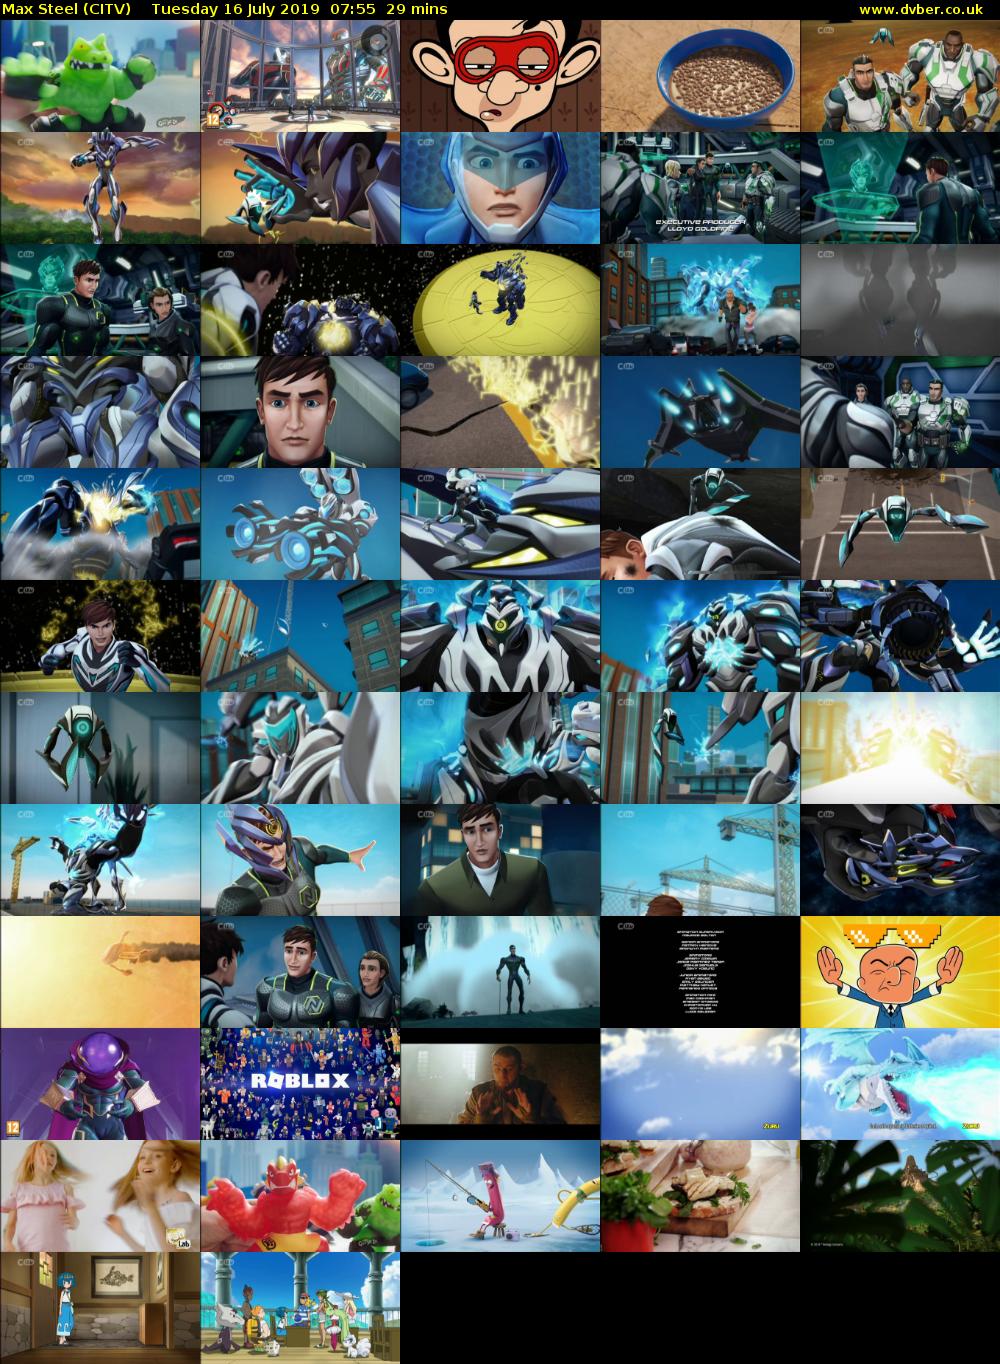 Max Steel (CITV) Tuesday 16 July 2019 07:55 - 08:24